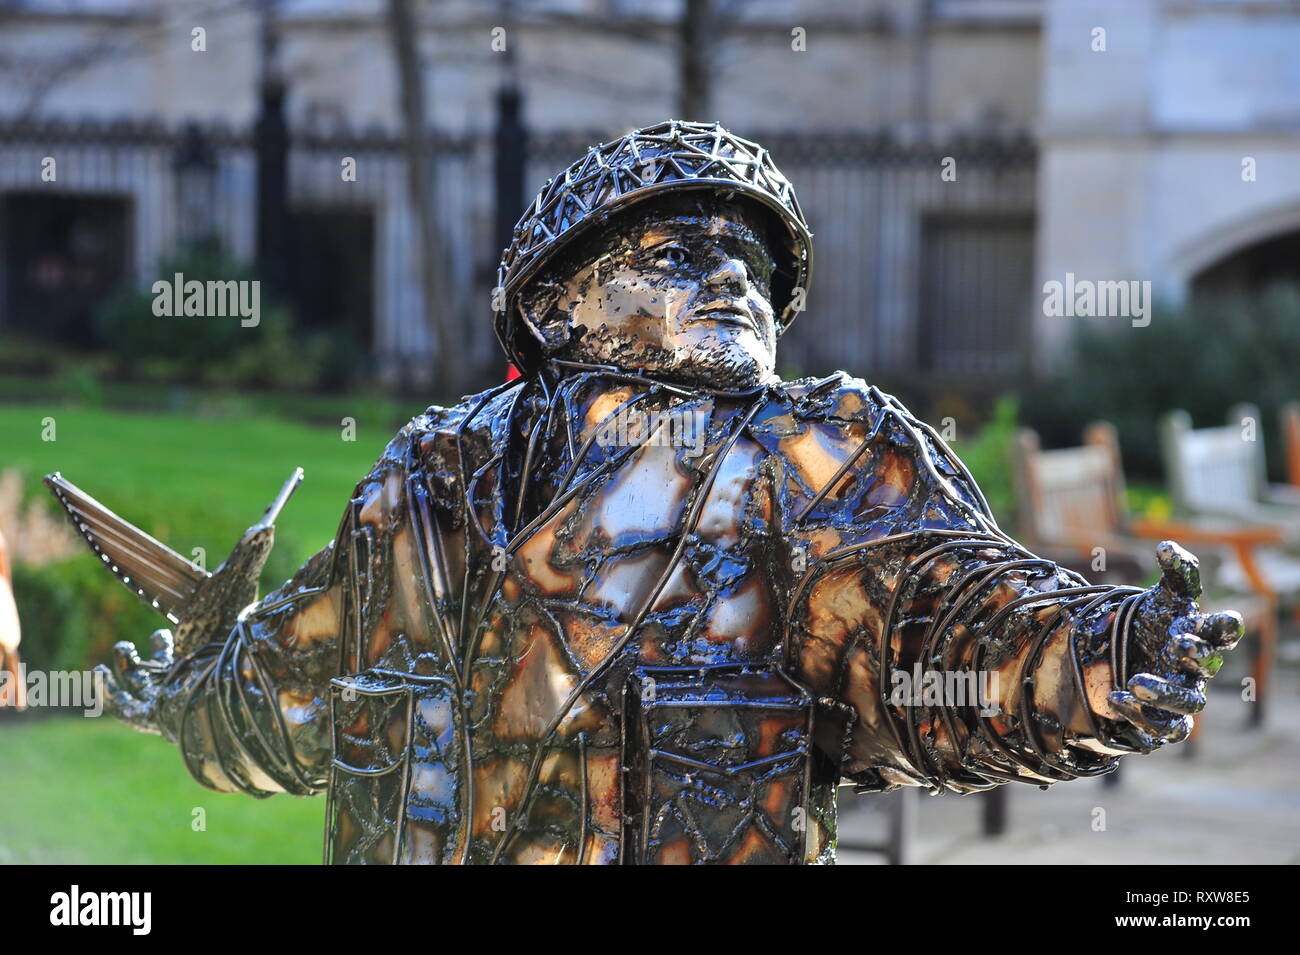 Soldiers of Sacrifice sculpture by artist Alfie Bradley on display in the grounds of St Nicholas Church Liverpool. Stock Photo